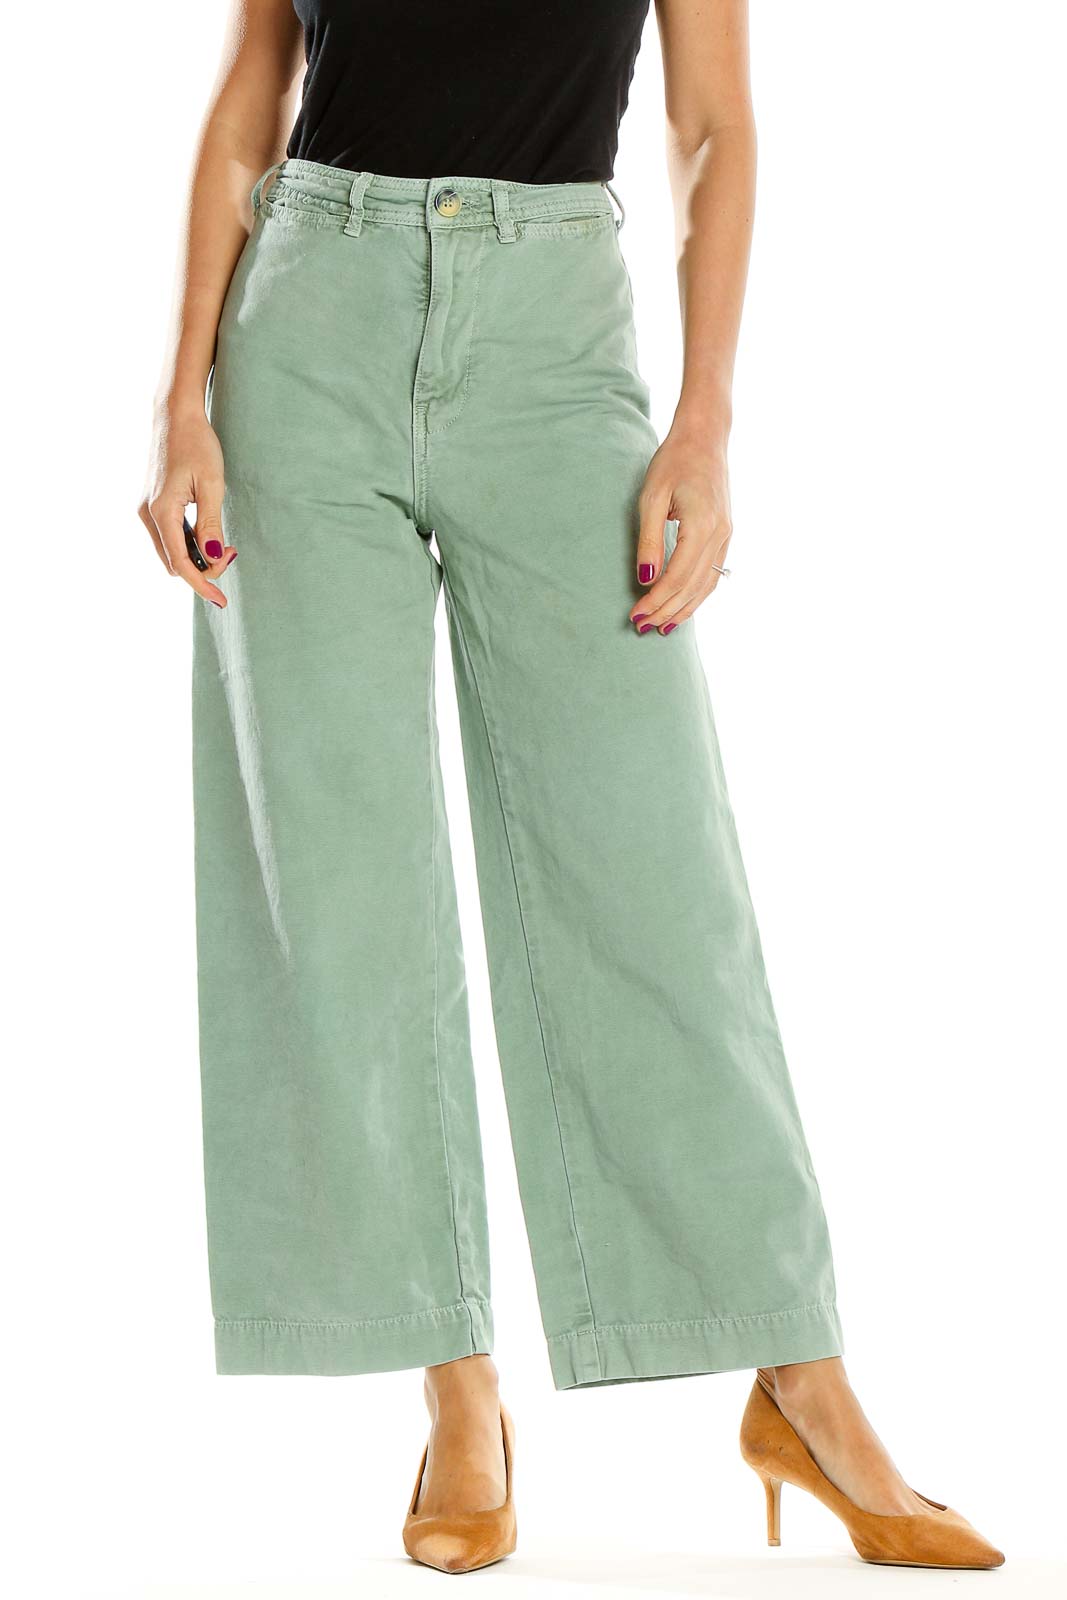 Green High Waisted Wide Leg Jeans Front